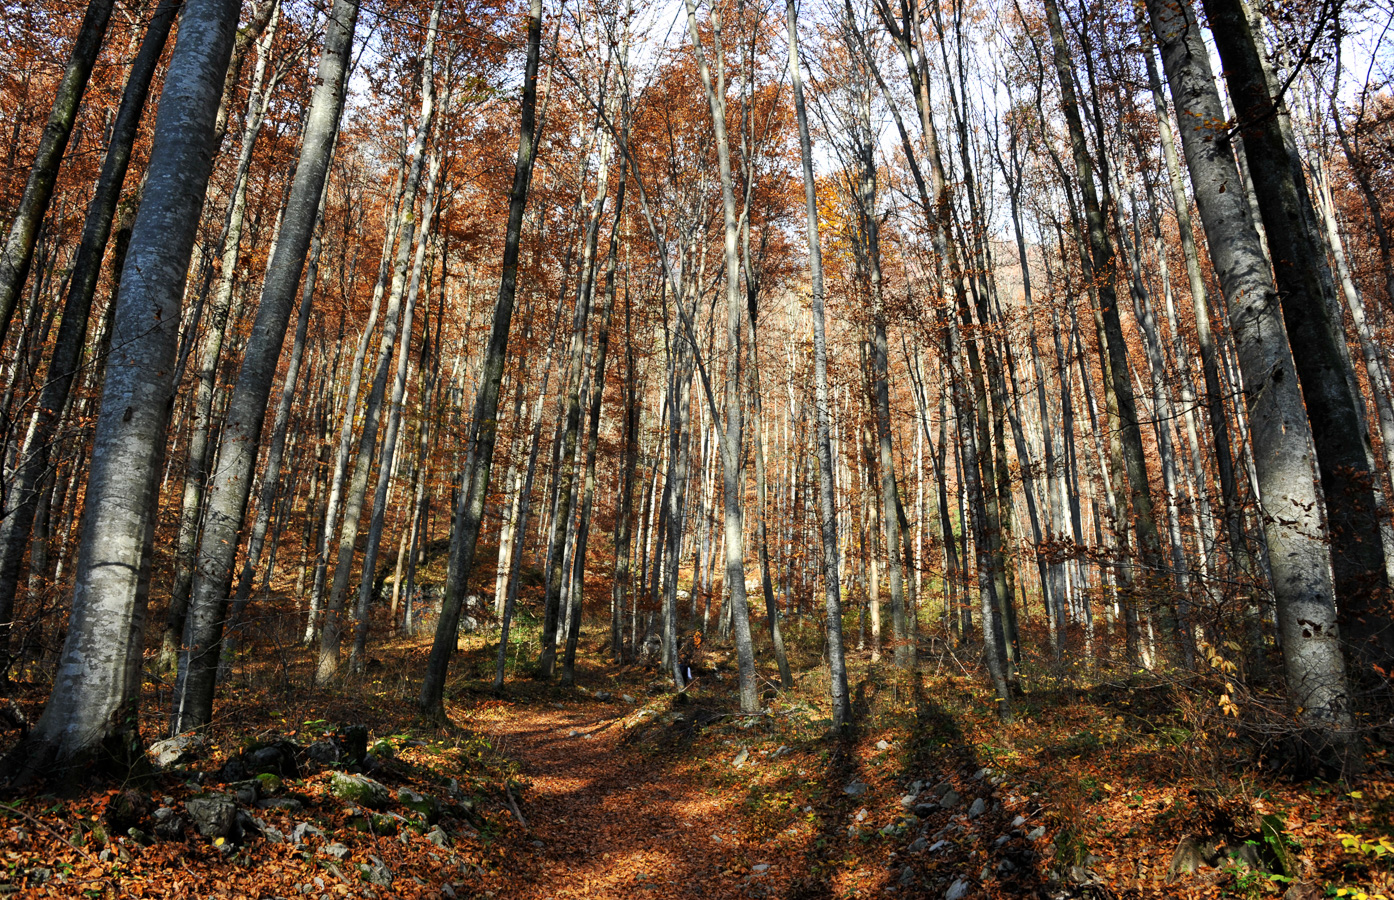 Beautiful autumn forest at the beginning of the hike [28 mm, 1/80 sec at f / 10, ISO 400]